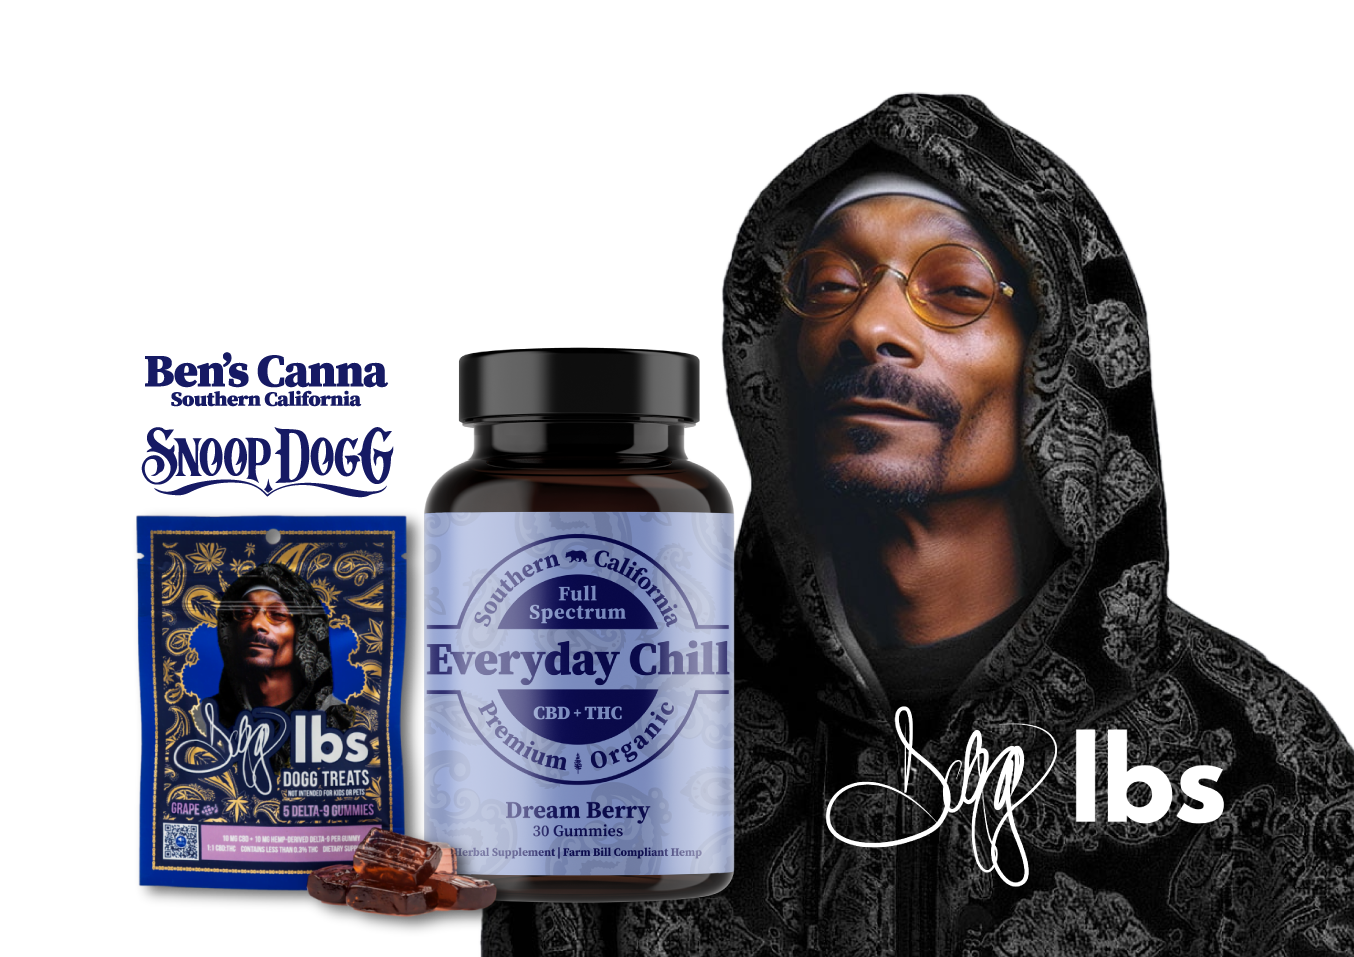 Everyday Chill - Dream Berry OG Limited Edition + Snoop Dogg 5-Pack.